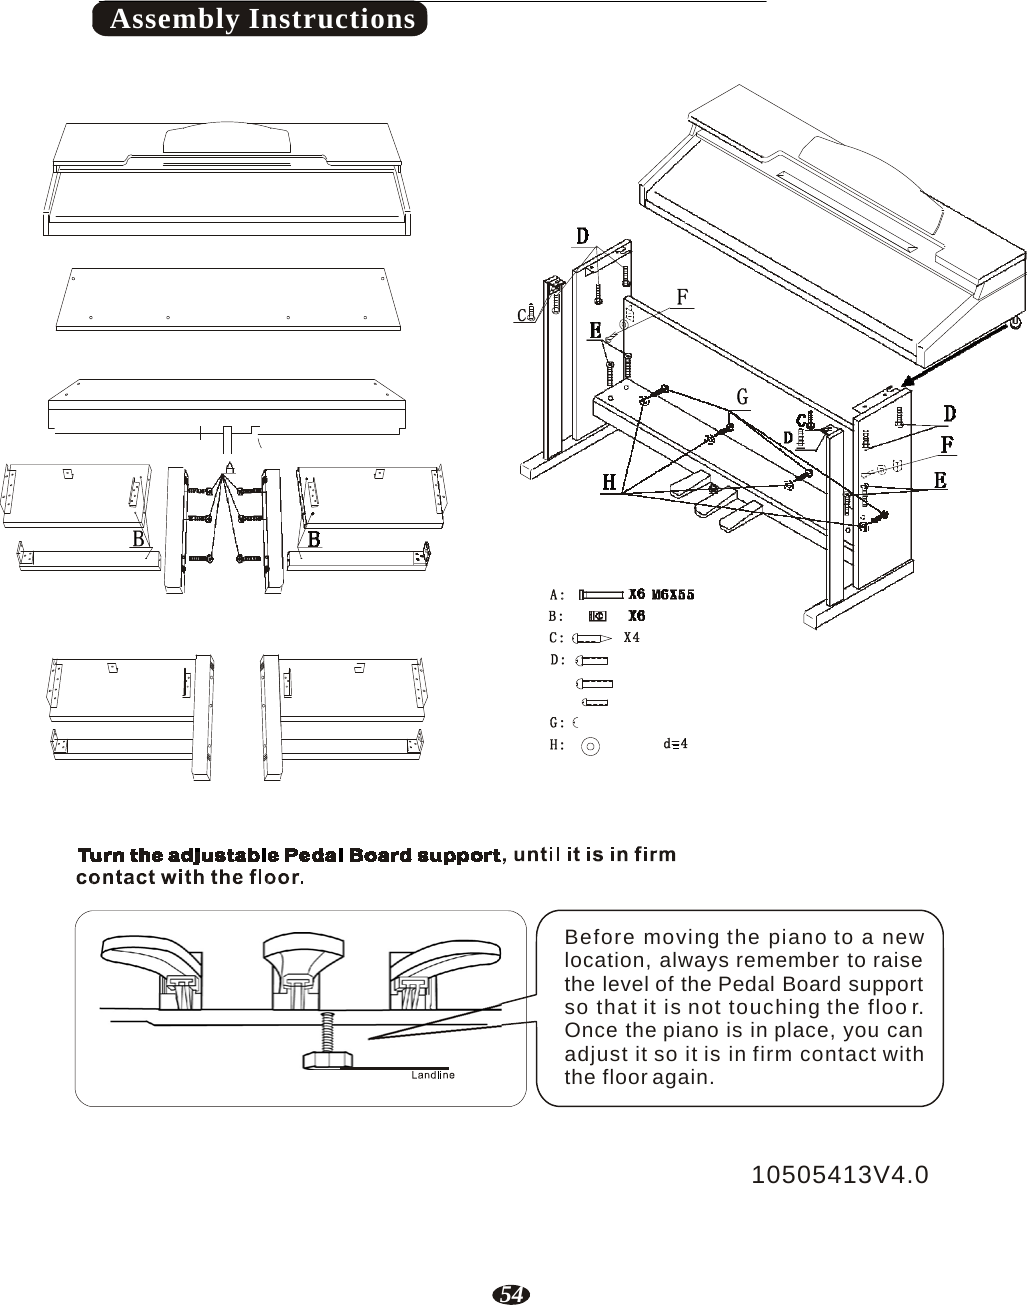 54    Assembly Instructions                                             Before moving the piano to a new location, always remember to raise the level of the Pedal Board support so that it is not touching the floo r. Once the piano is in place, you can adjust it so it is in firm contact with the floor again.    10505413V4.0 